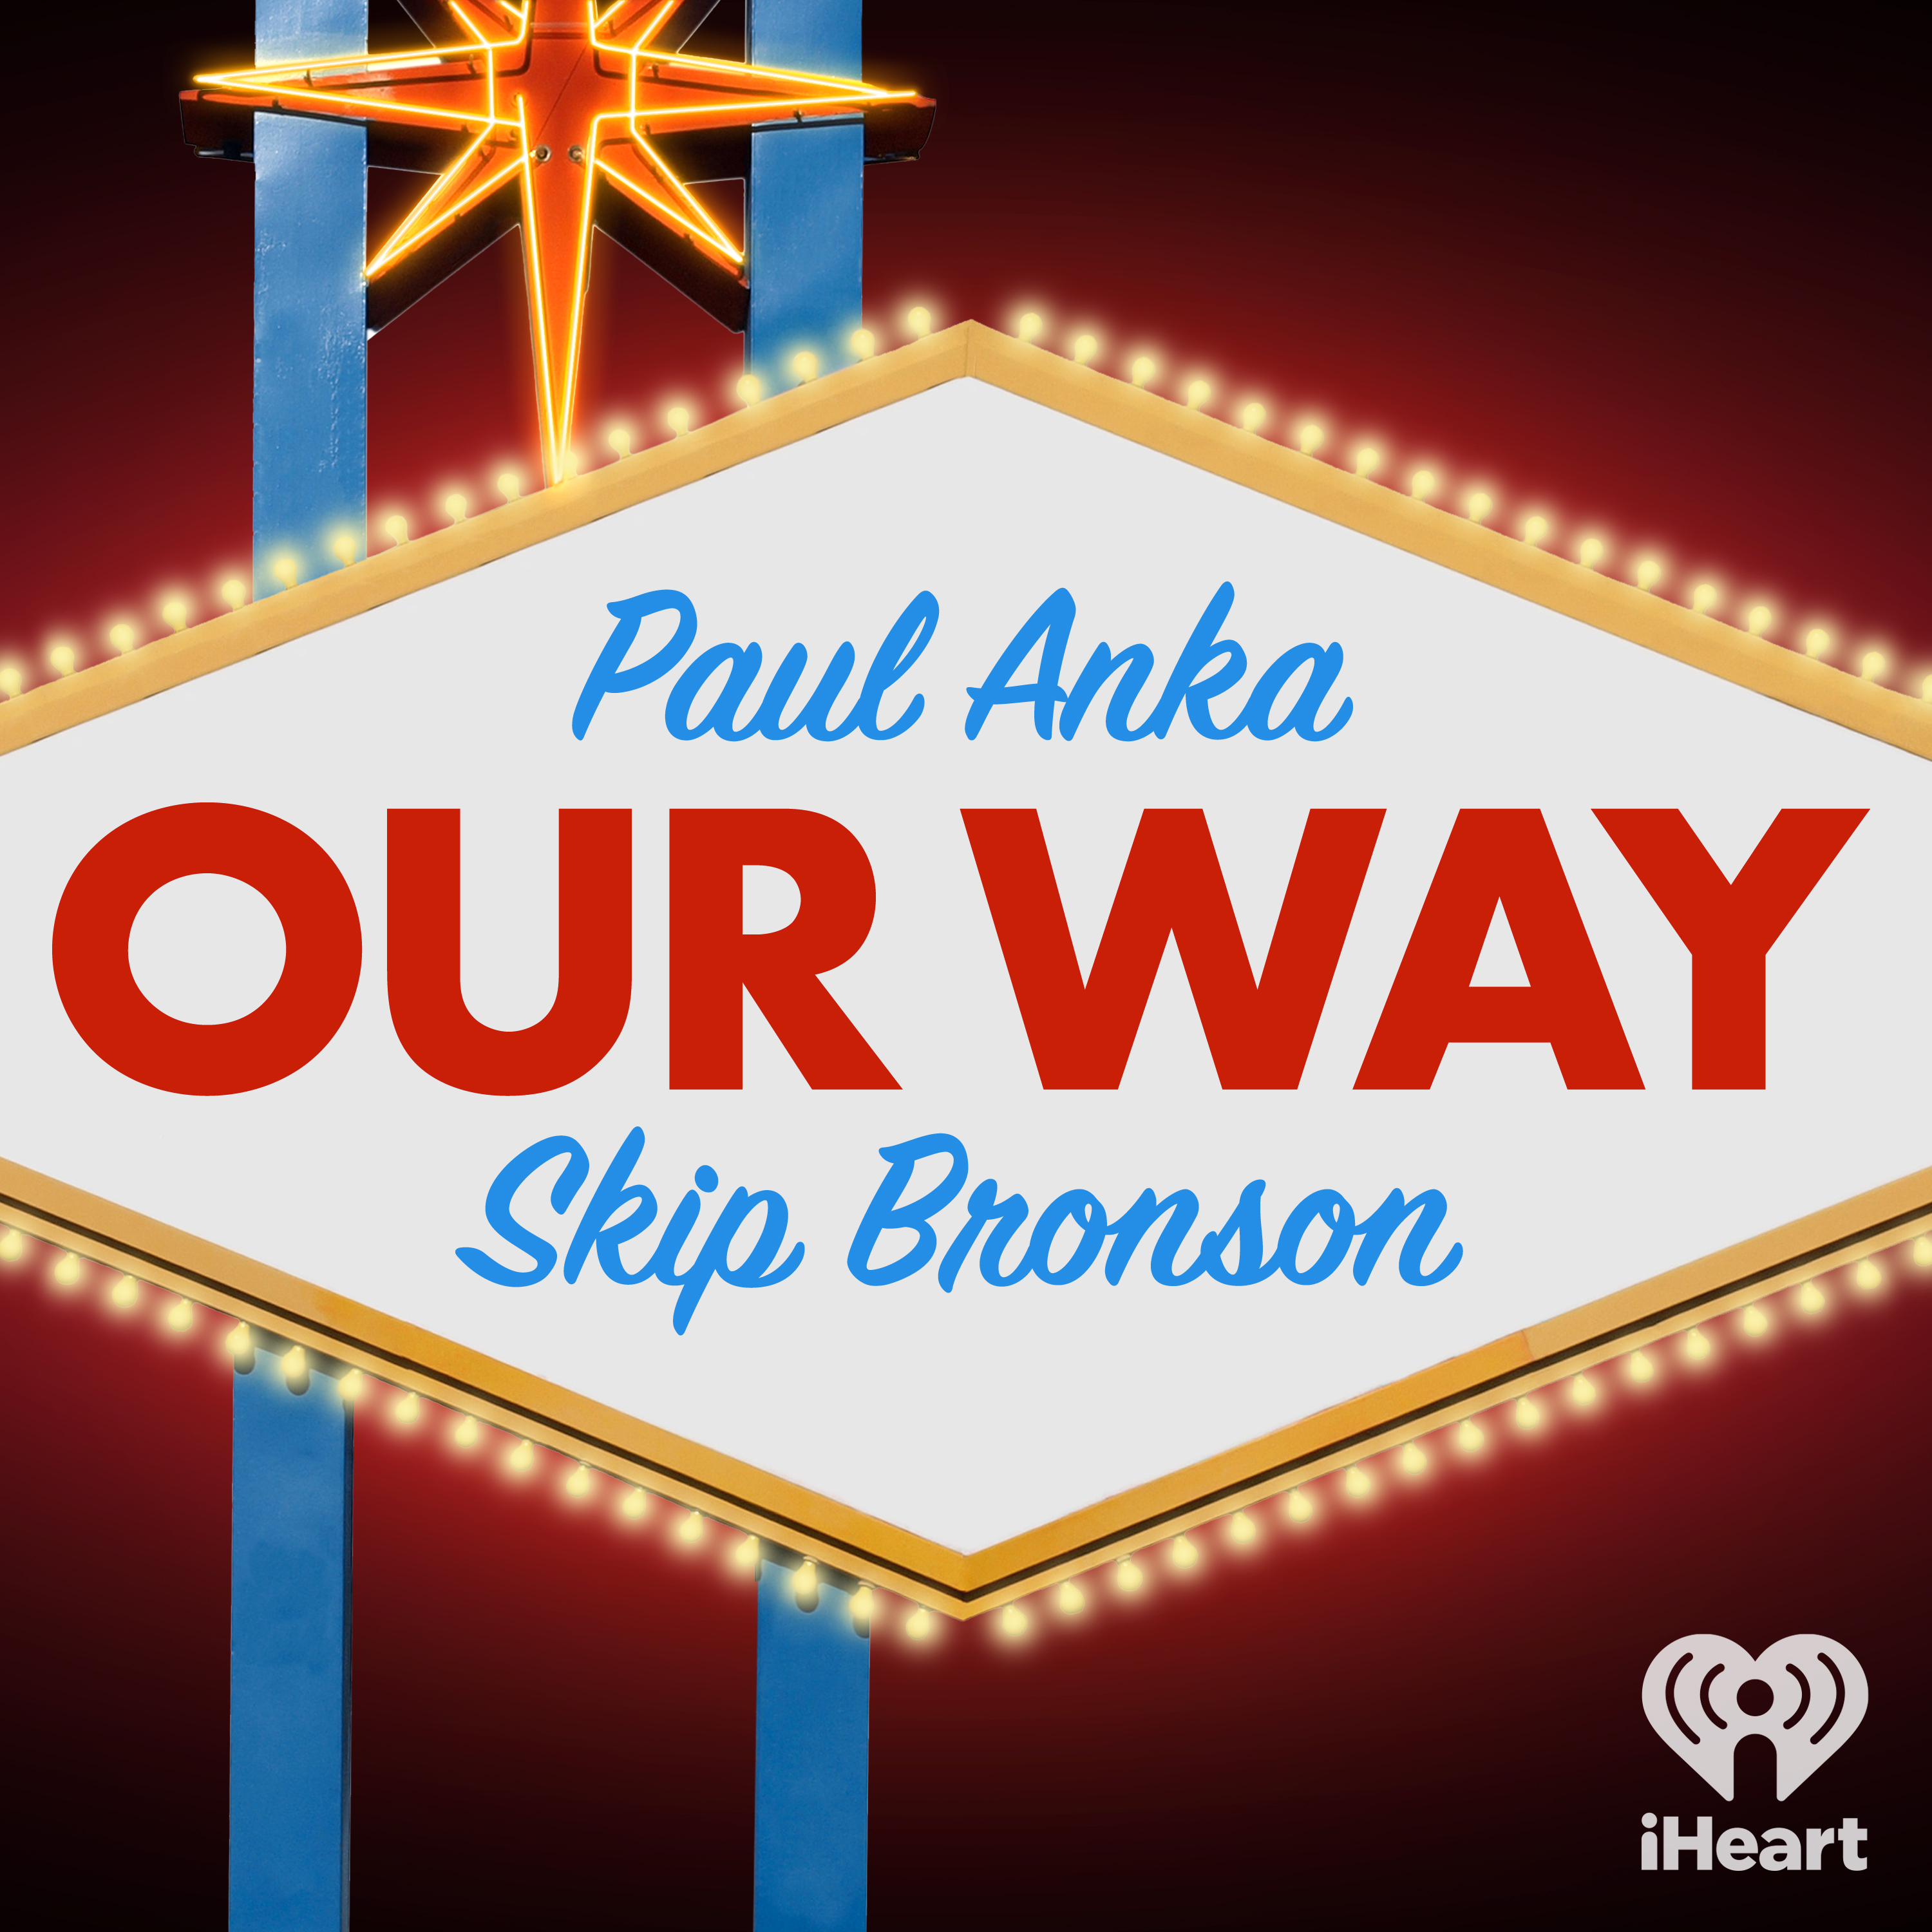 Our Way with Paul Anka and Skip Bronson podcast show image